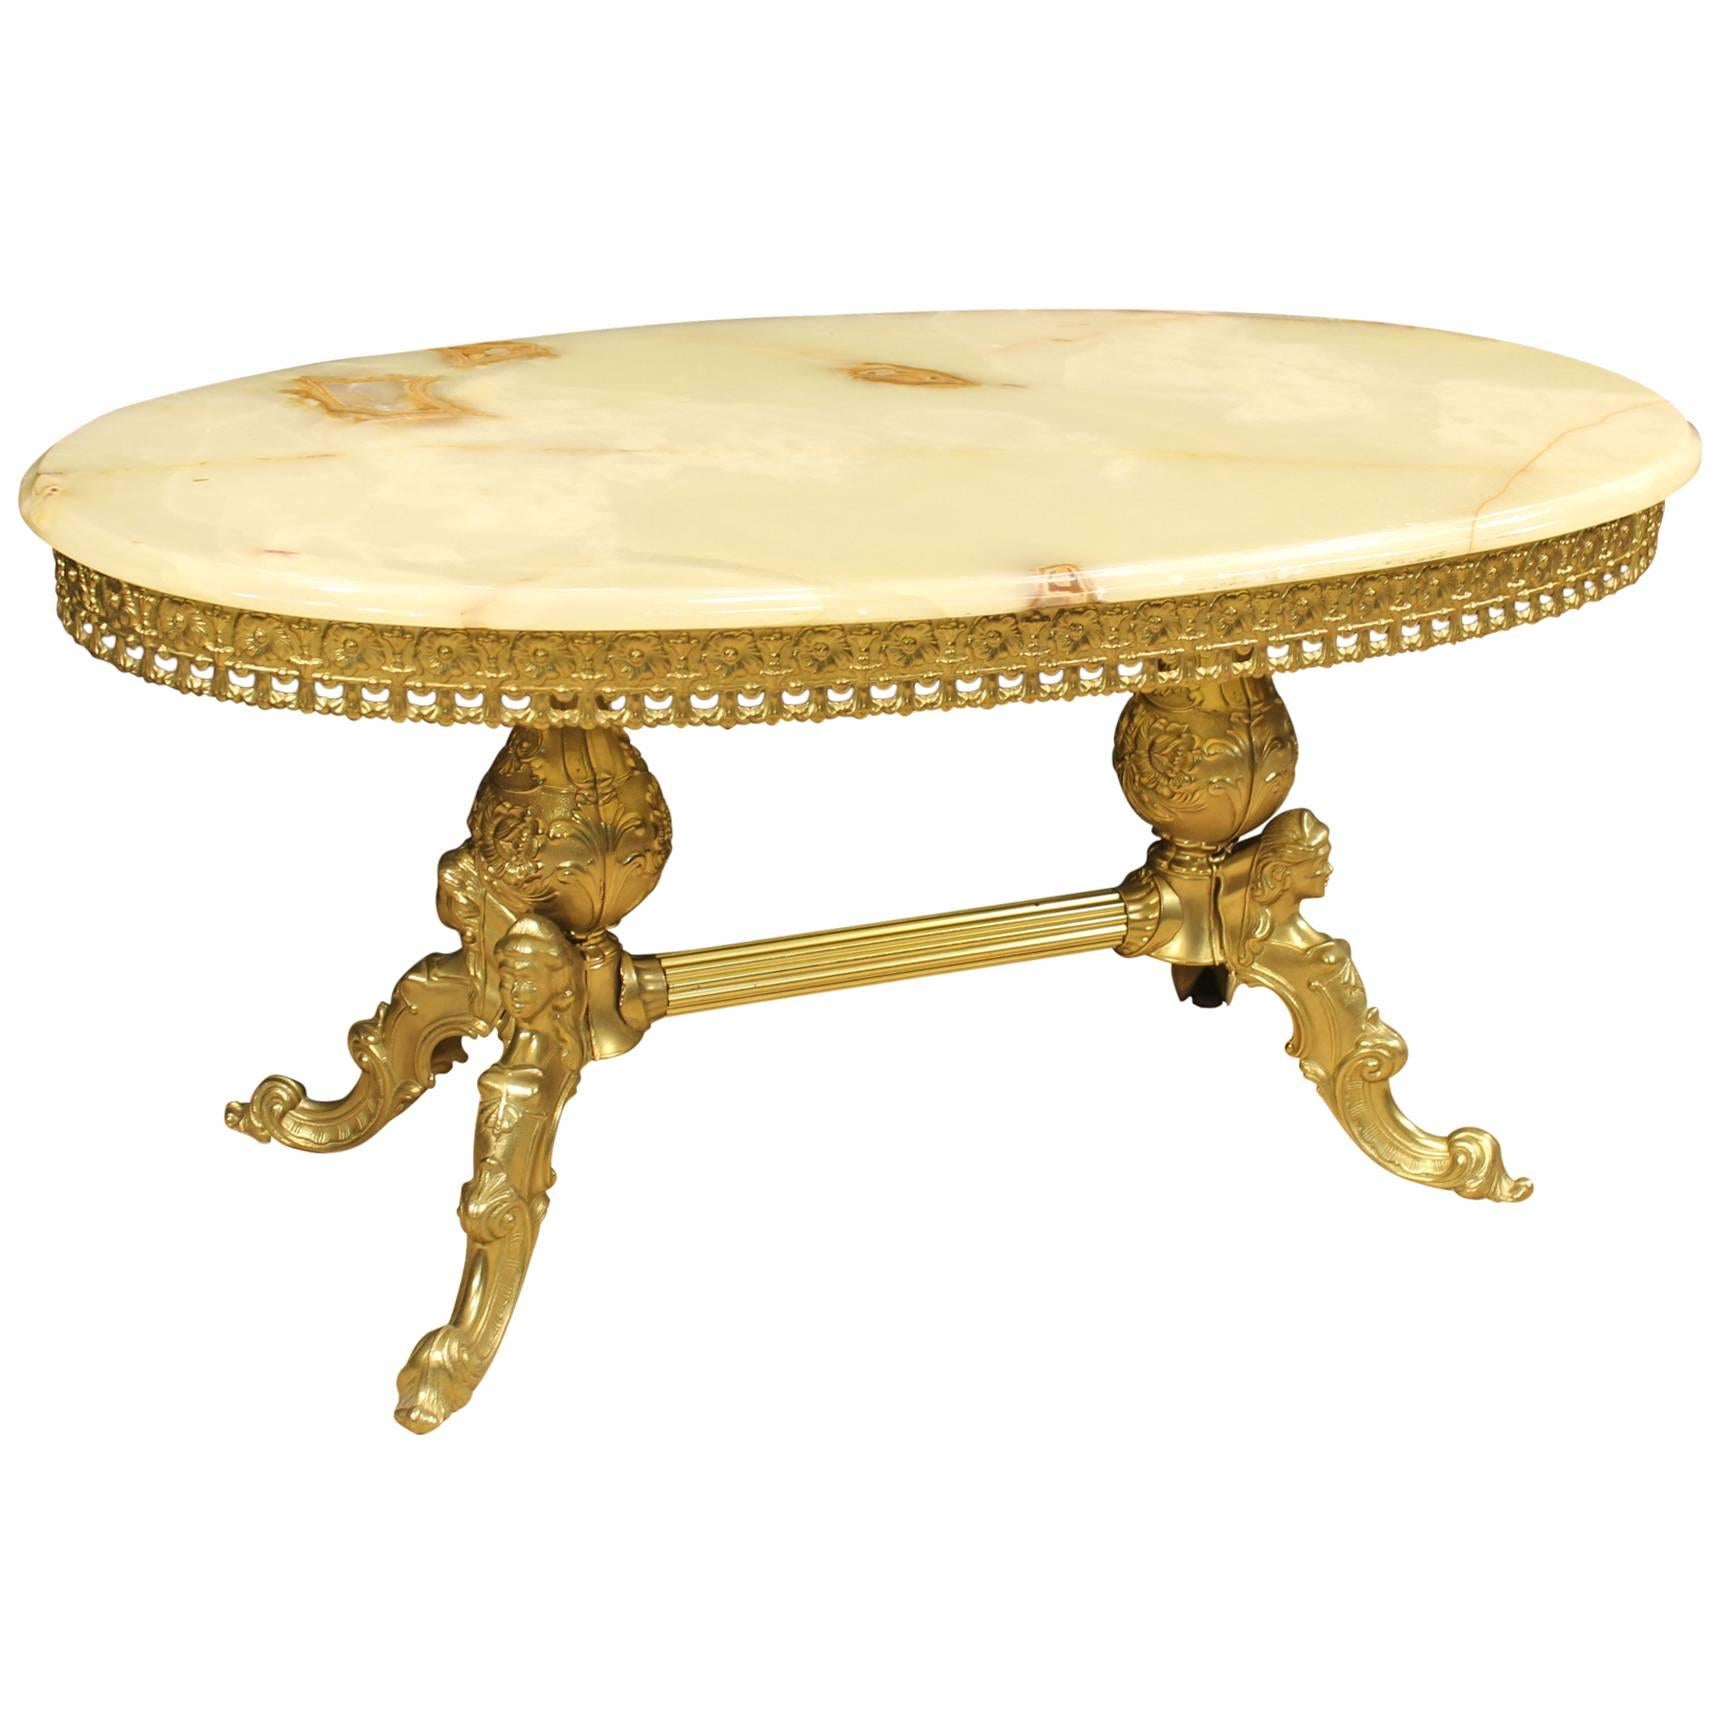 Golden Chiseled Brass Coffee Table with Onyx Top